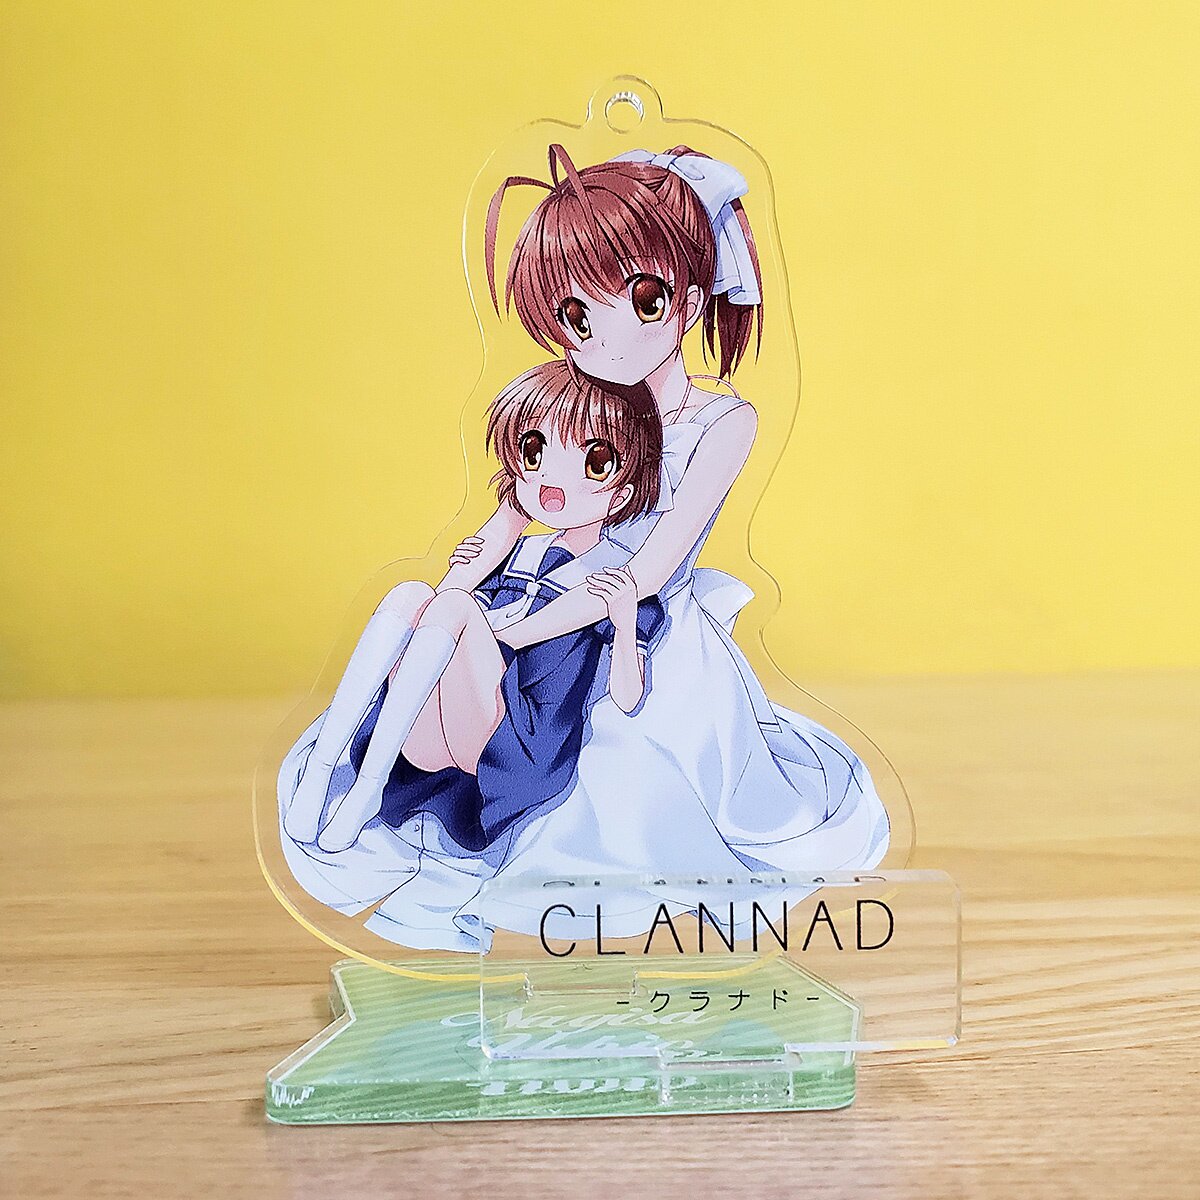 Clannad: Complete Season 1 & 2 Collection [Blu-ray]